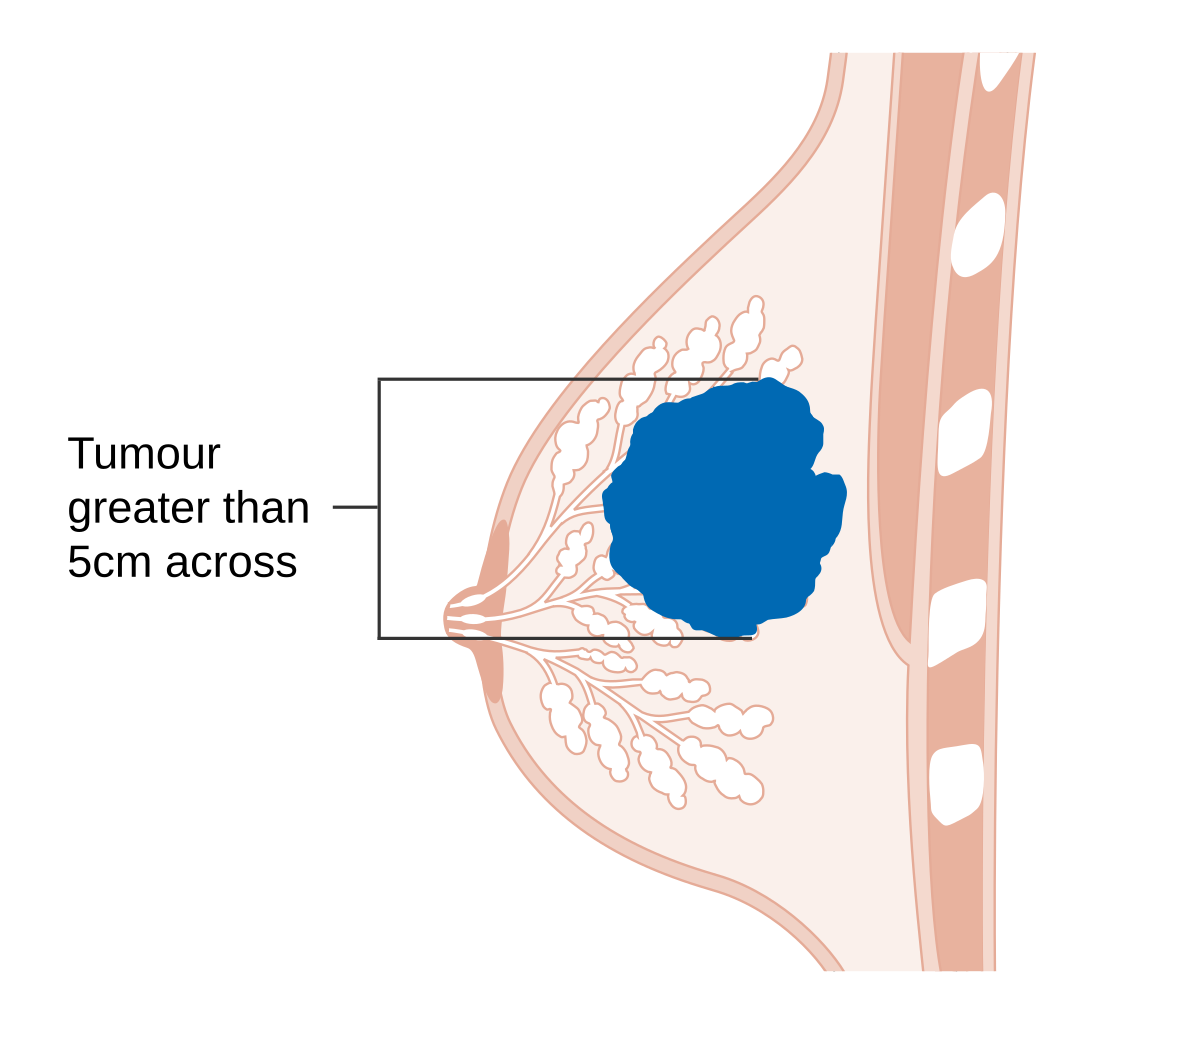 File:Diagram showing stage T3 breast cancer CRUK 259.svg - Wikipedia